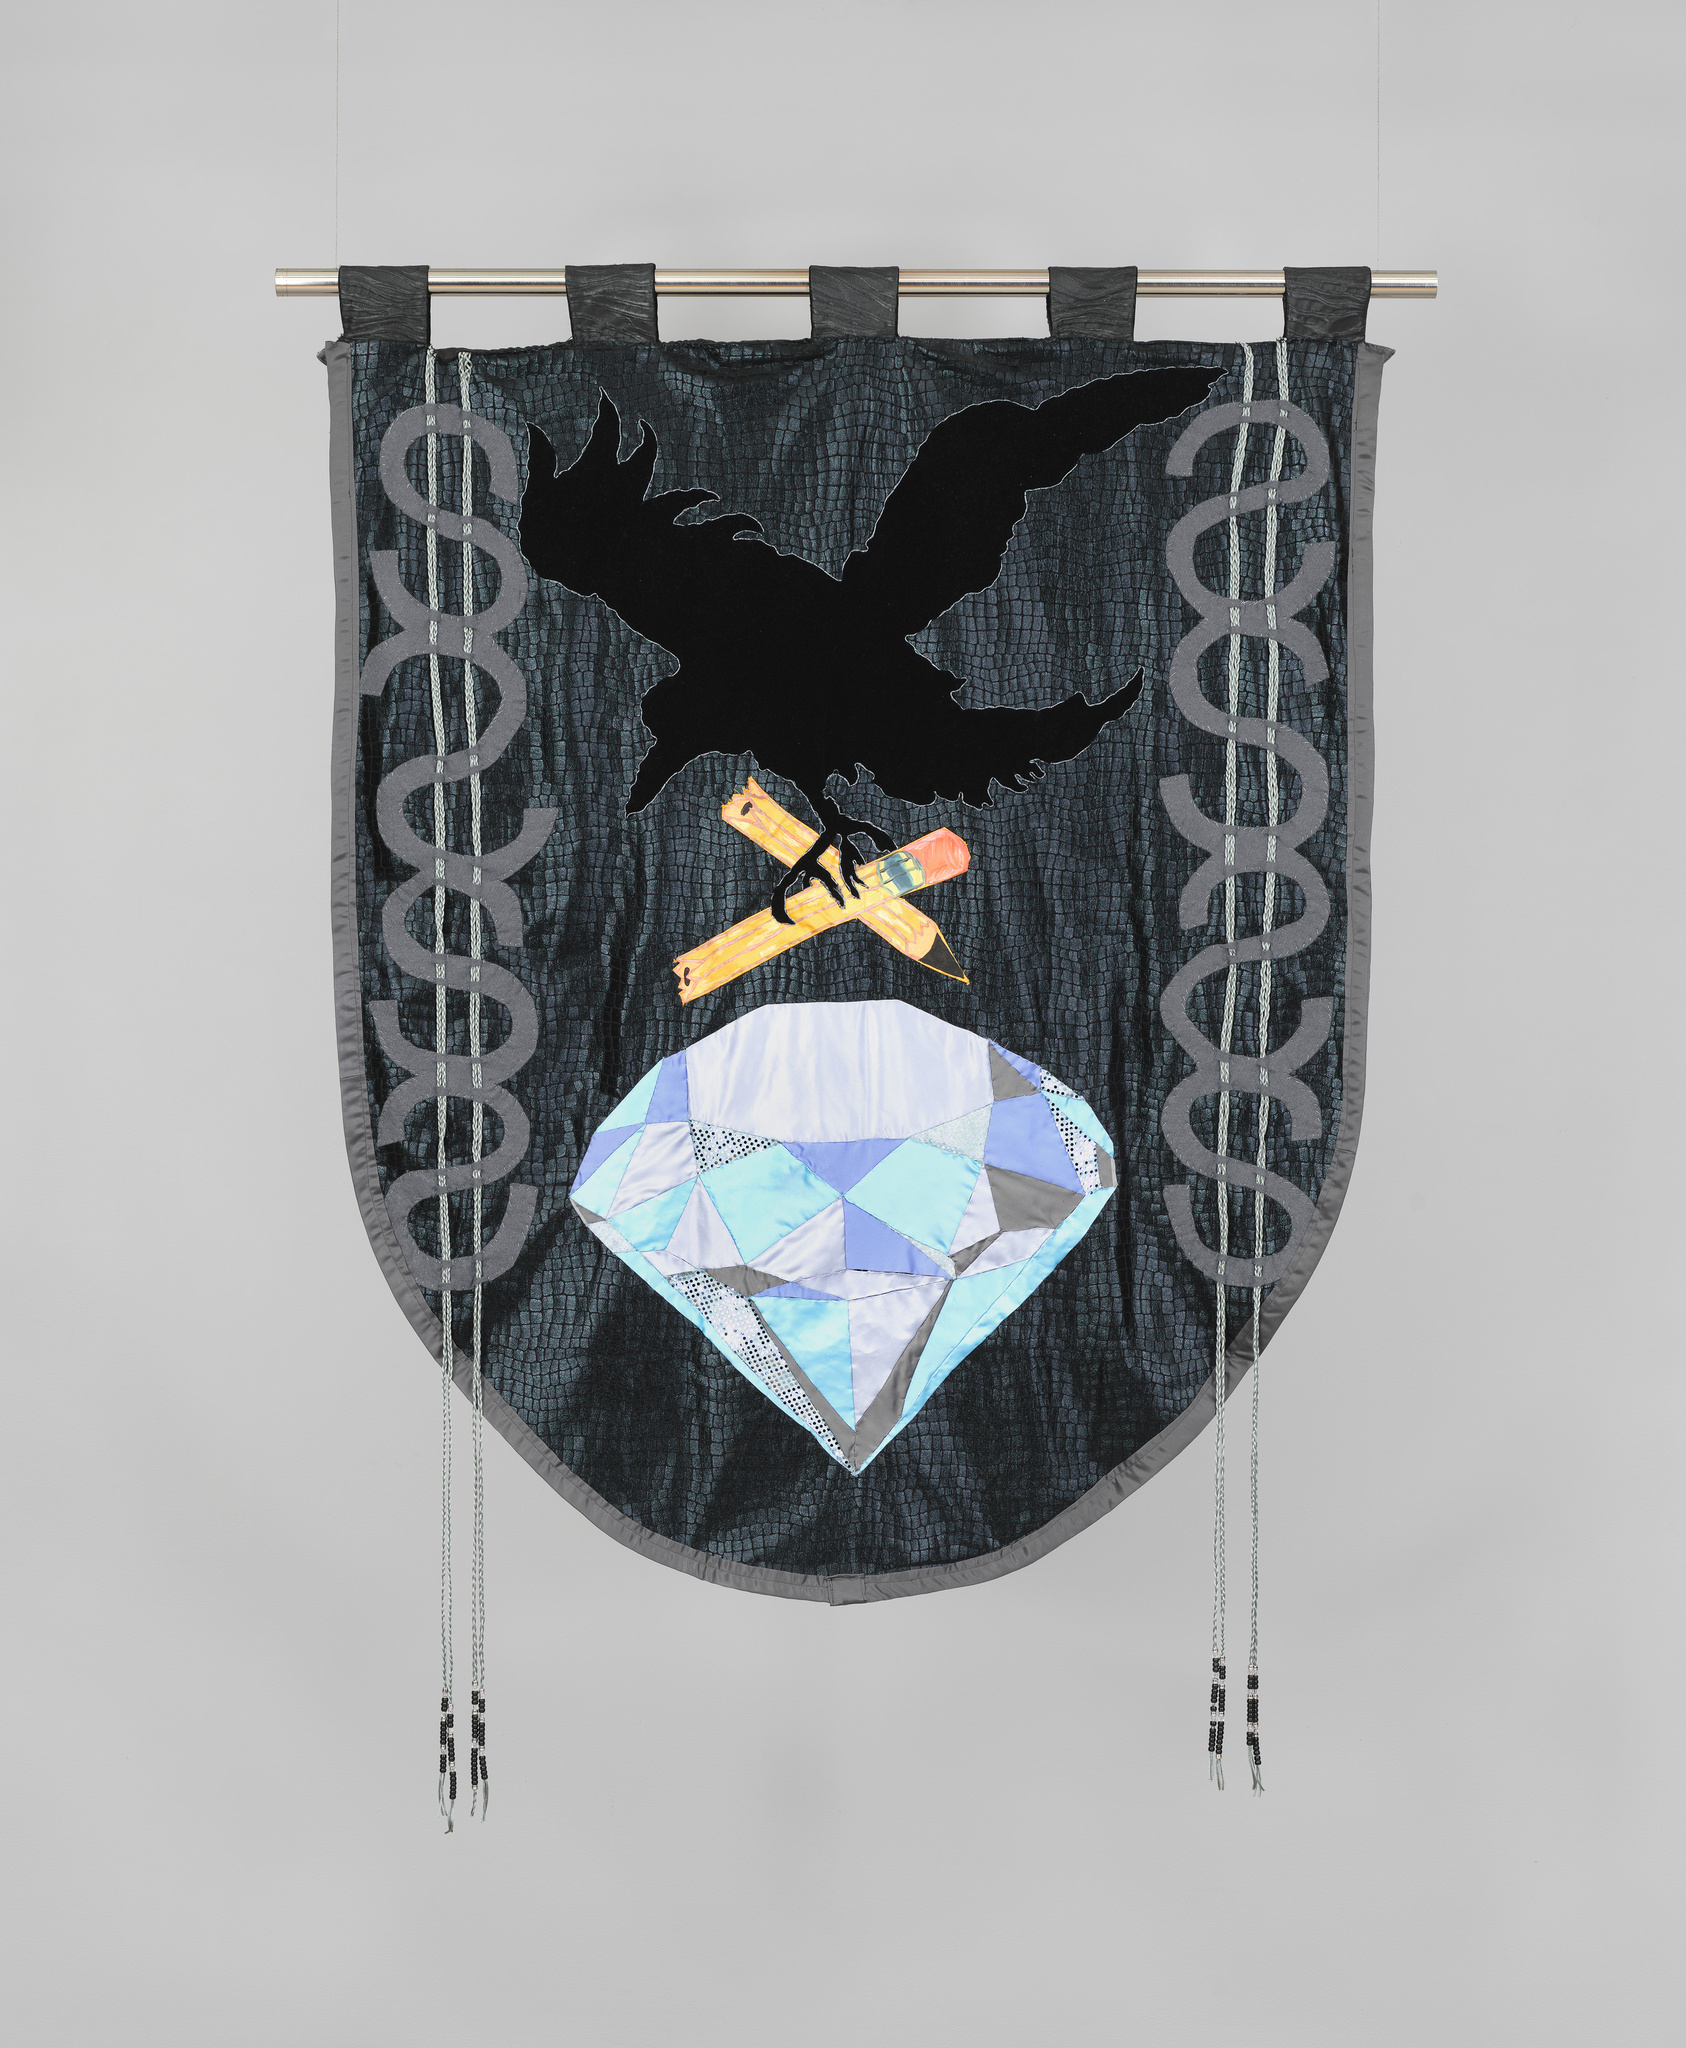 A black bird grasps two halves of a broken yellow pencil above a large diamond on a dark grey quilted banner.